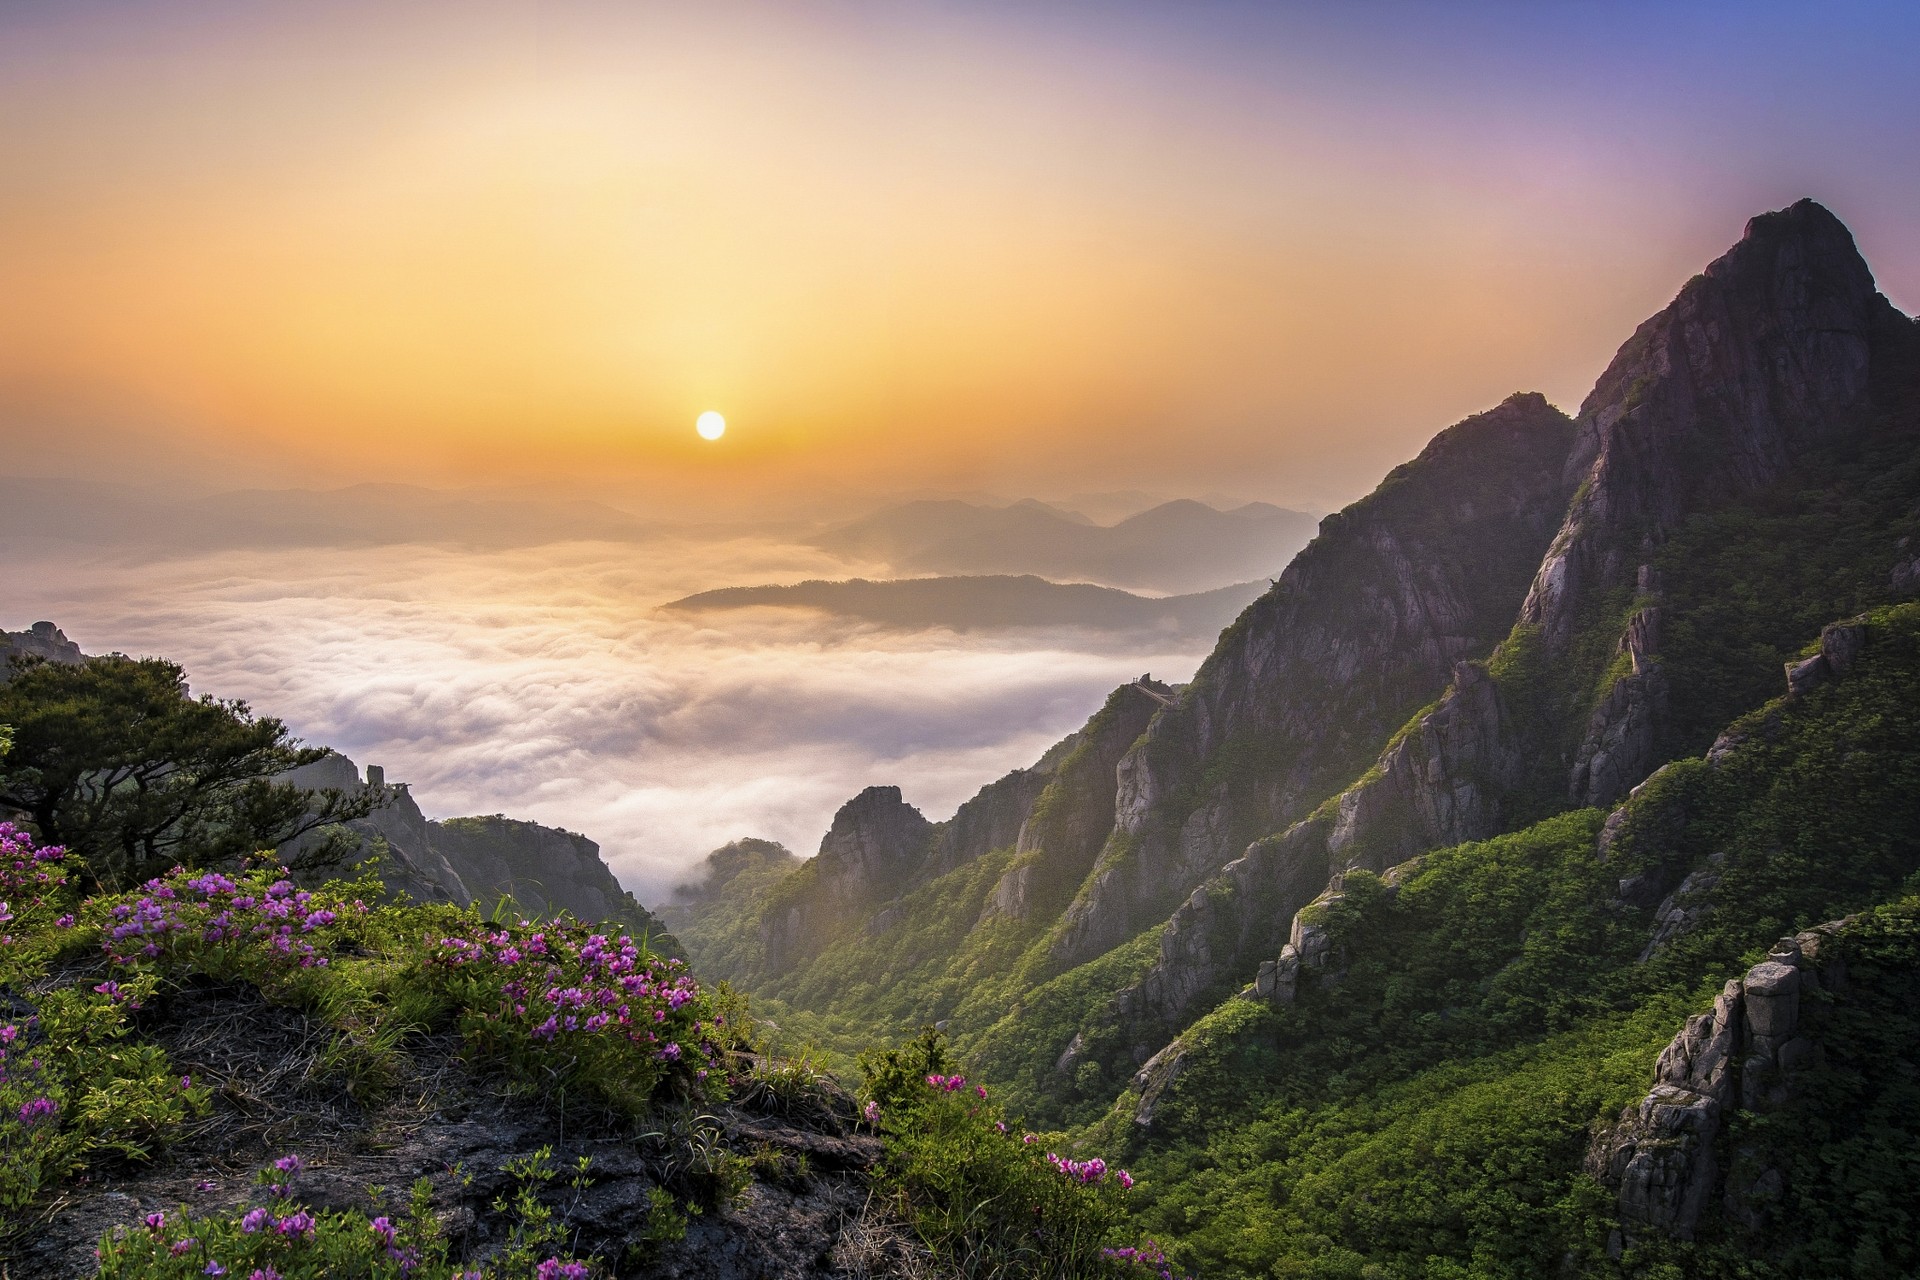 General 1920x1280 morning mountains clouds nature landscape South Korea wildflowers valley mist shrubs trees clear sky forest Asia orange sky sky sunlight